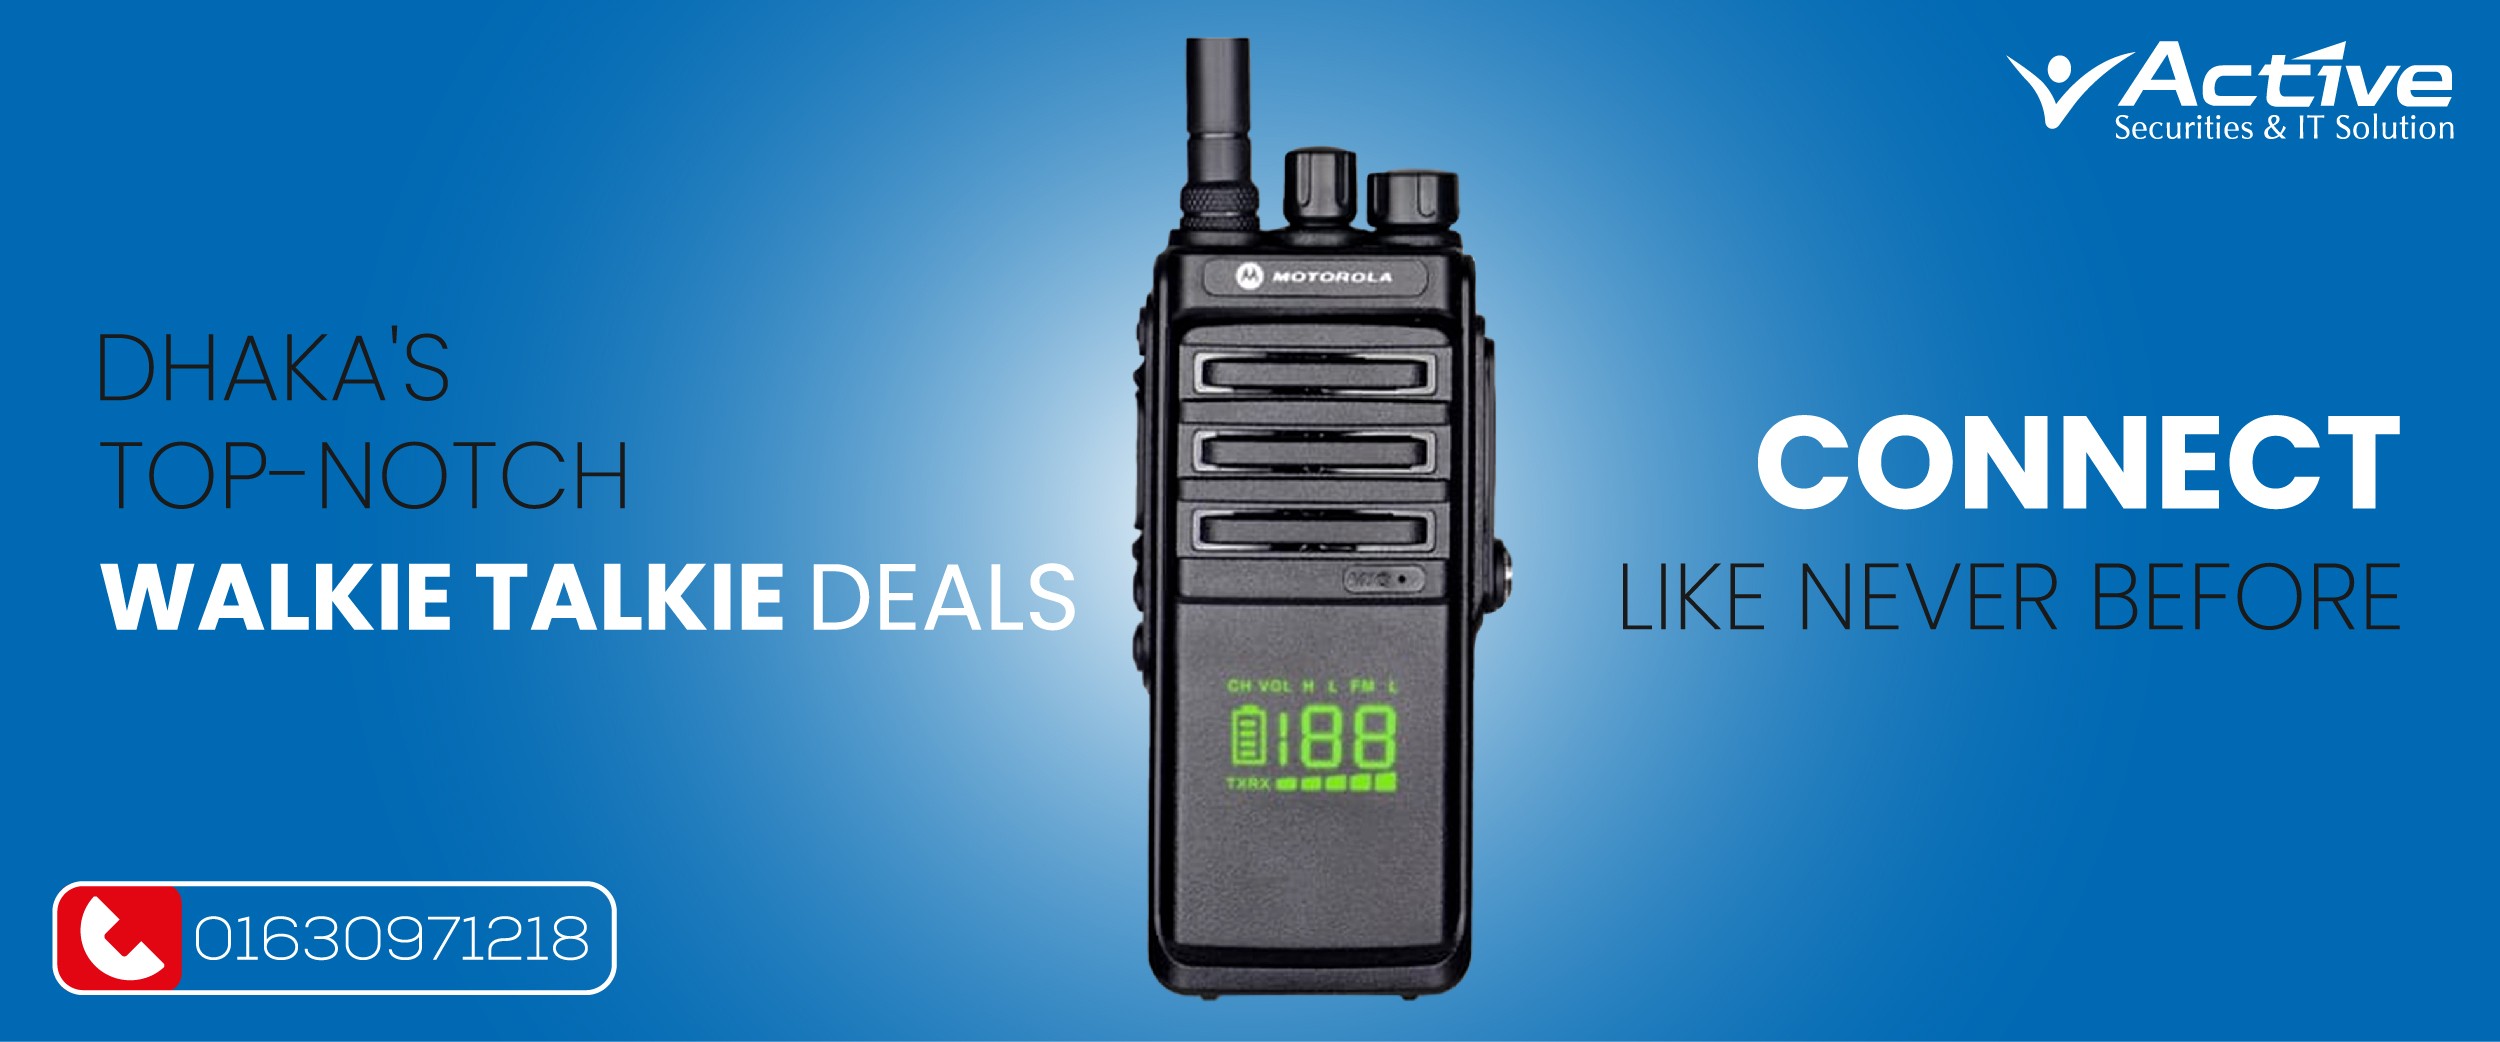 Dhaka's Top-Notch Walkie Talkie Deals - Connect Like Never Before